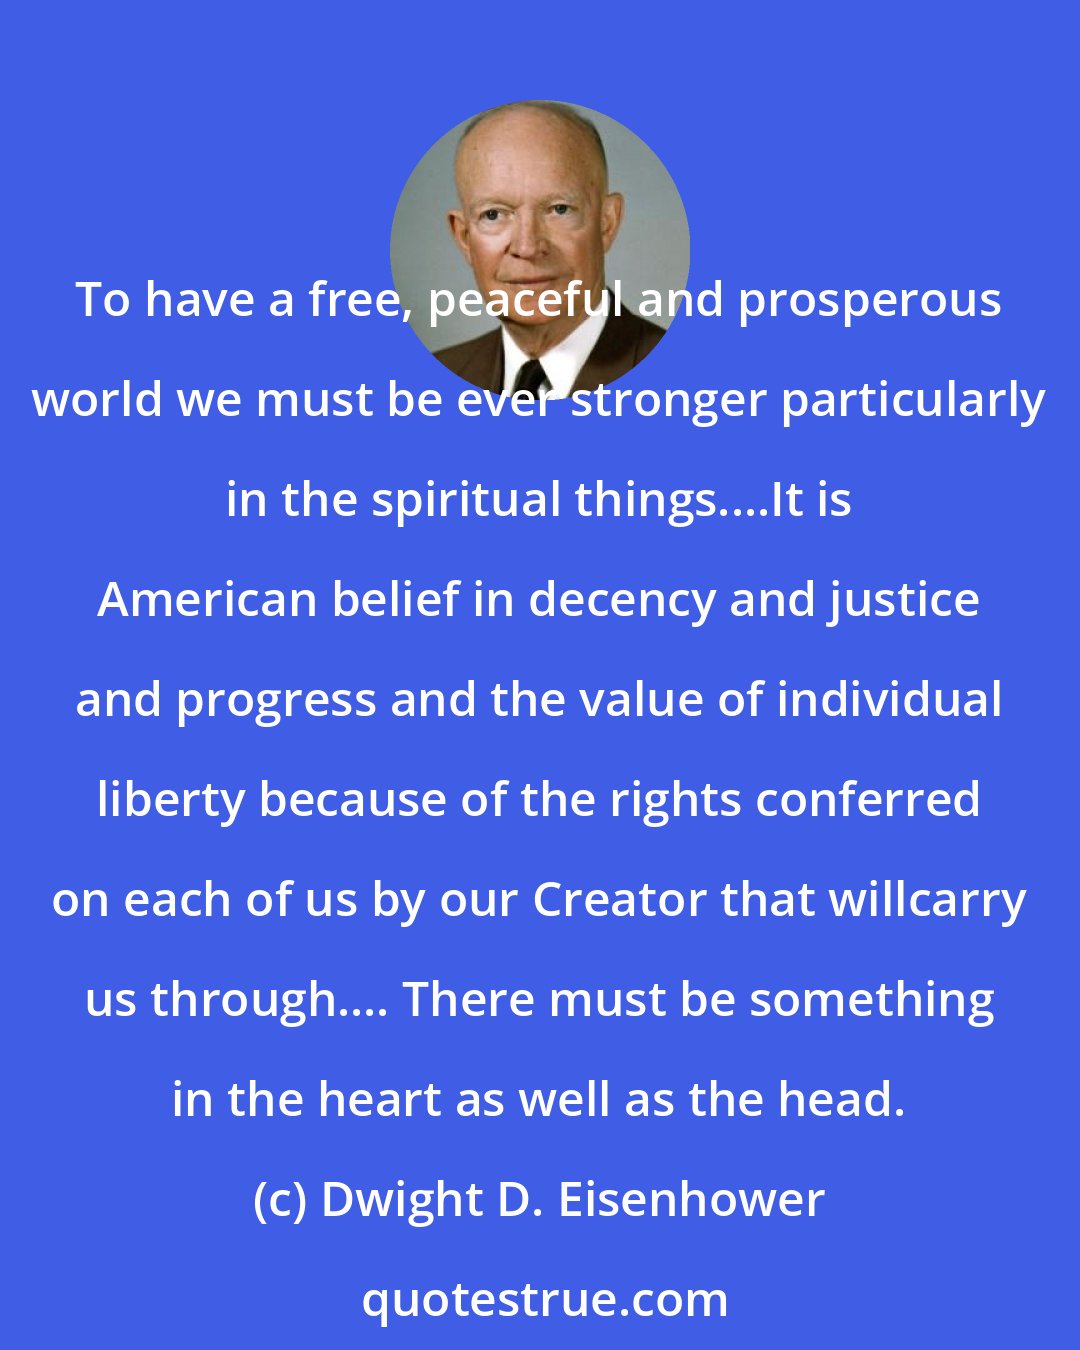 Dwight D. Eisenhower: To have a free, peaceful and prosperous world we must be ever stronger particularly in the spiritual things....It is American belief in decency and justice and progress and the value of individual liberty because of the rights conferred on each of us by our Creator that willcarry us through.... There must be something in the heart as well as the head.